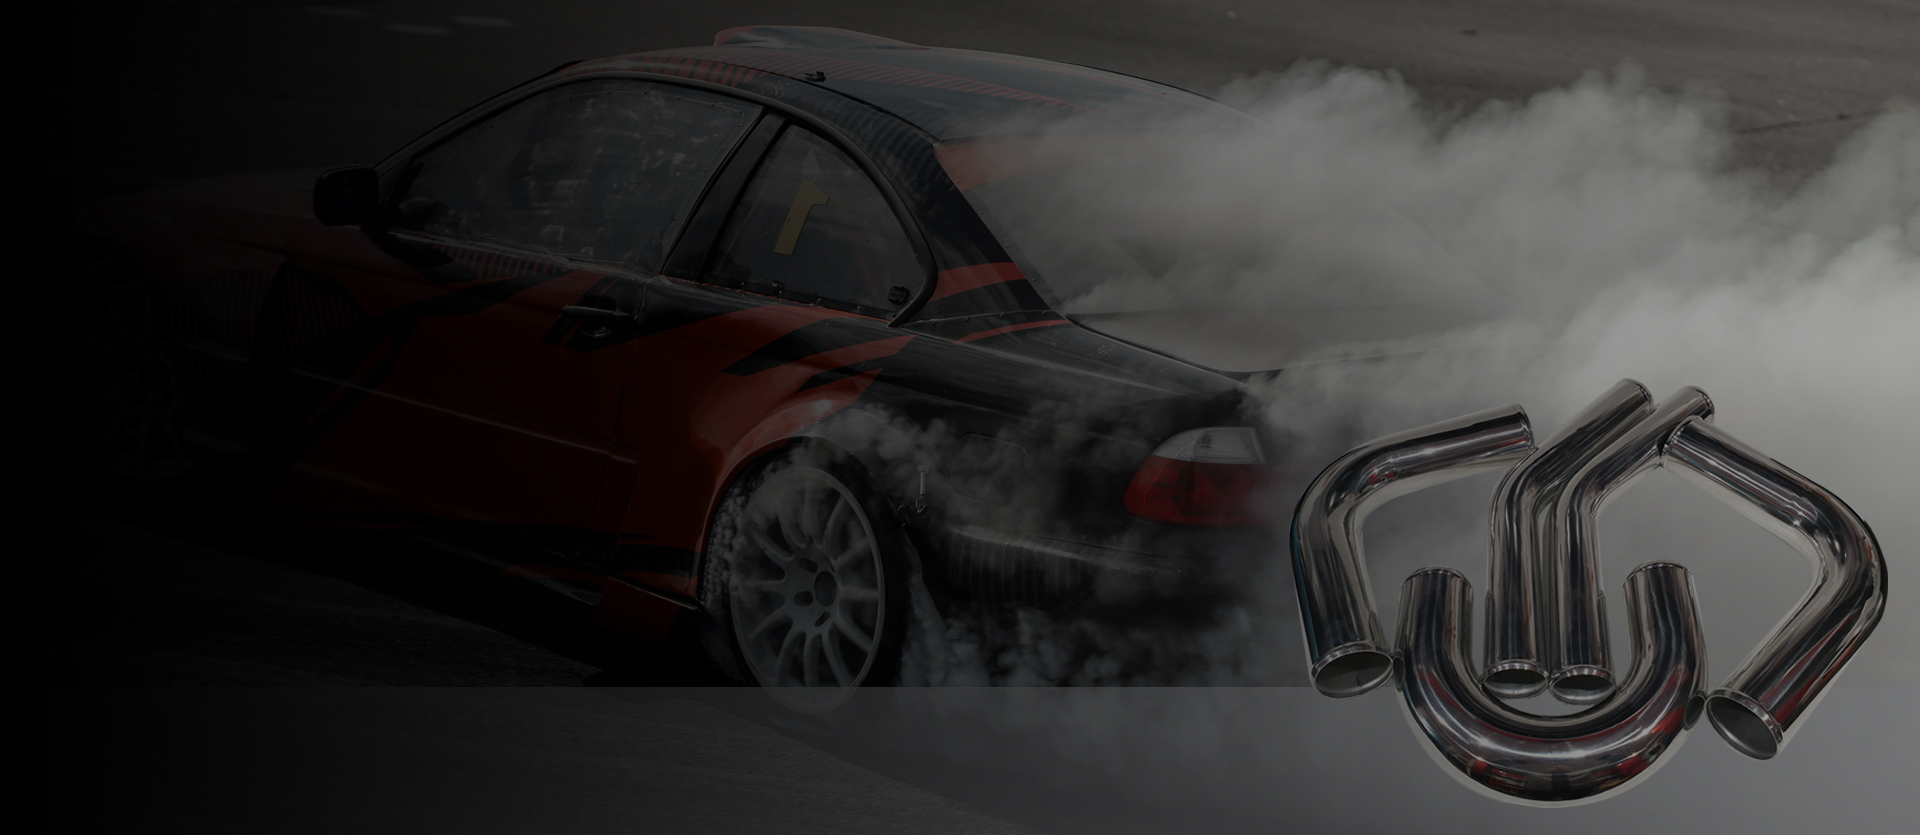 Vapor Racing - Slide 4 - Automotive and Performance parts, Intercoolers and Oilcoolers